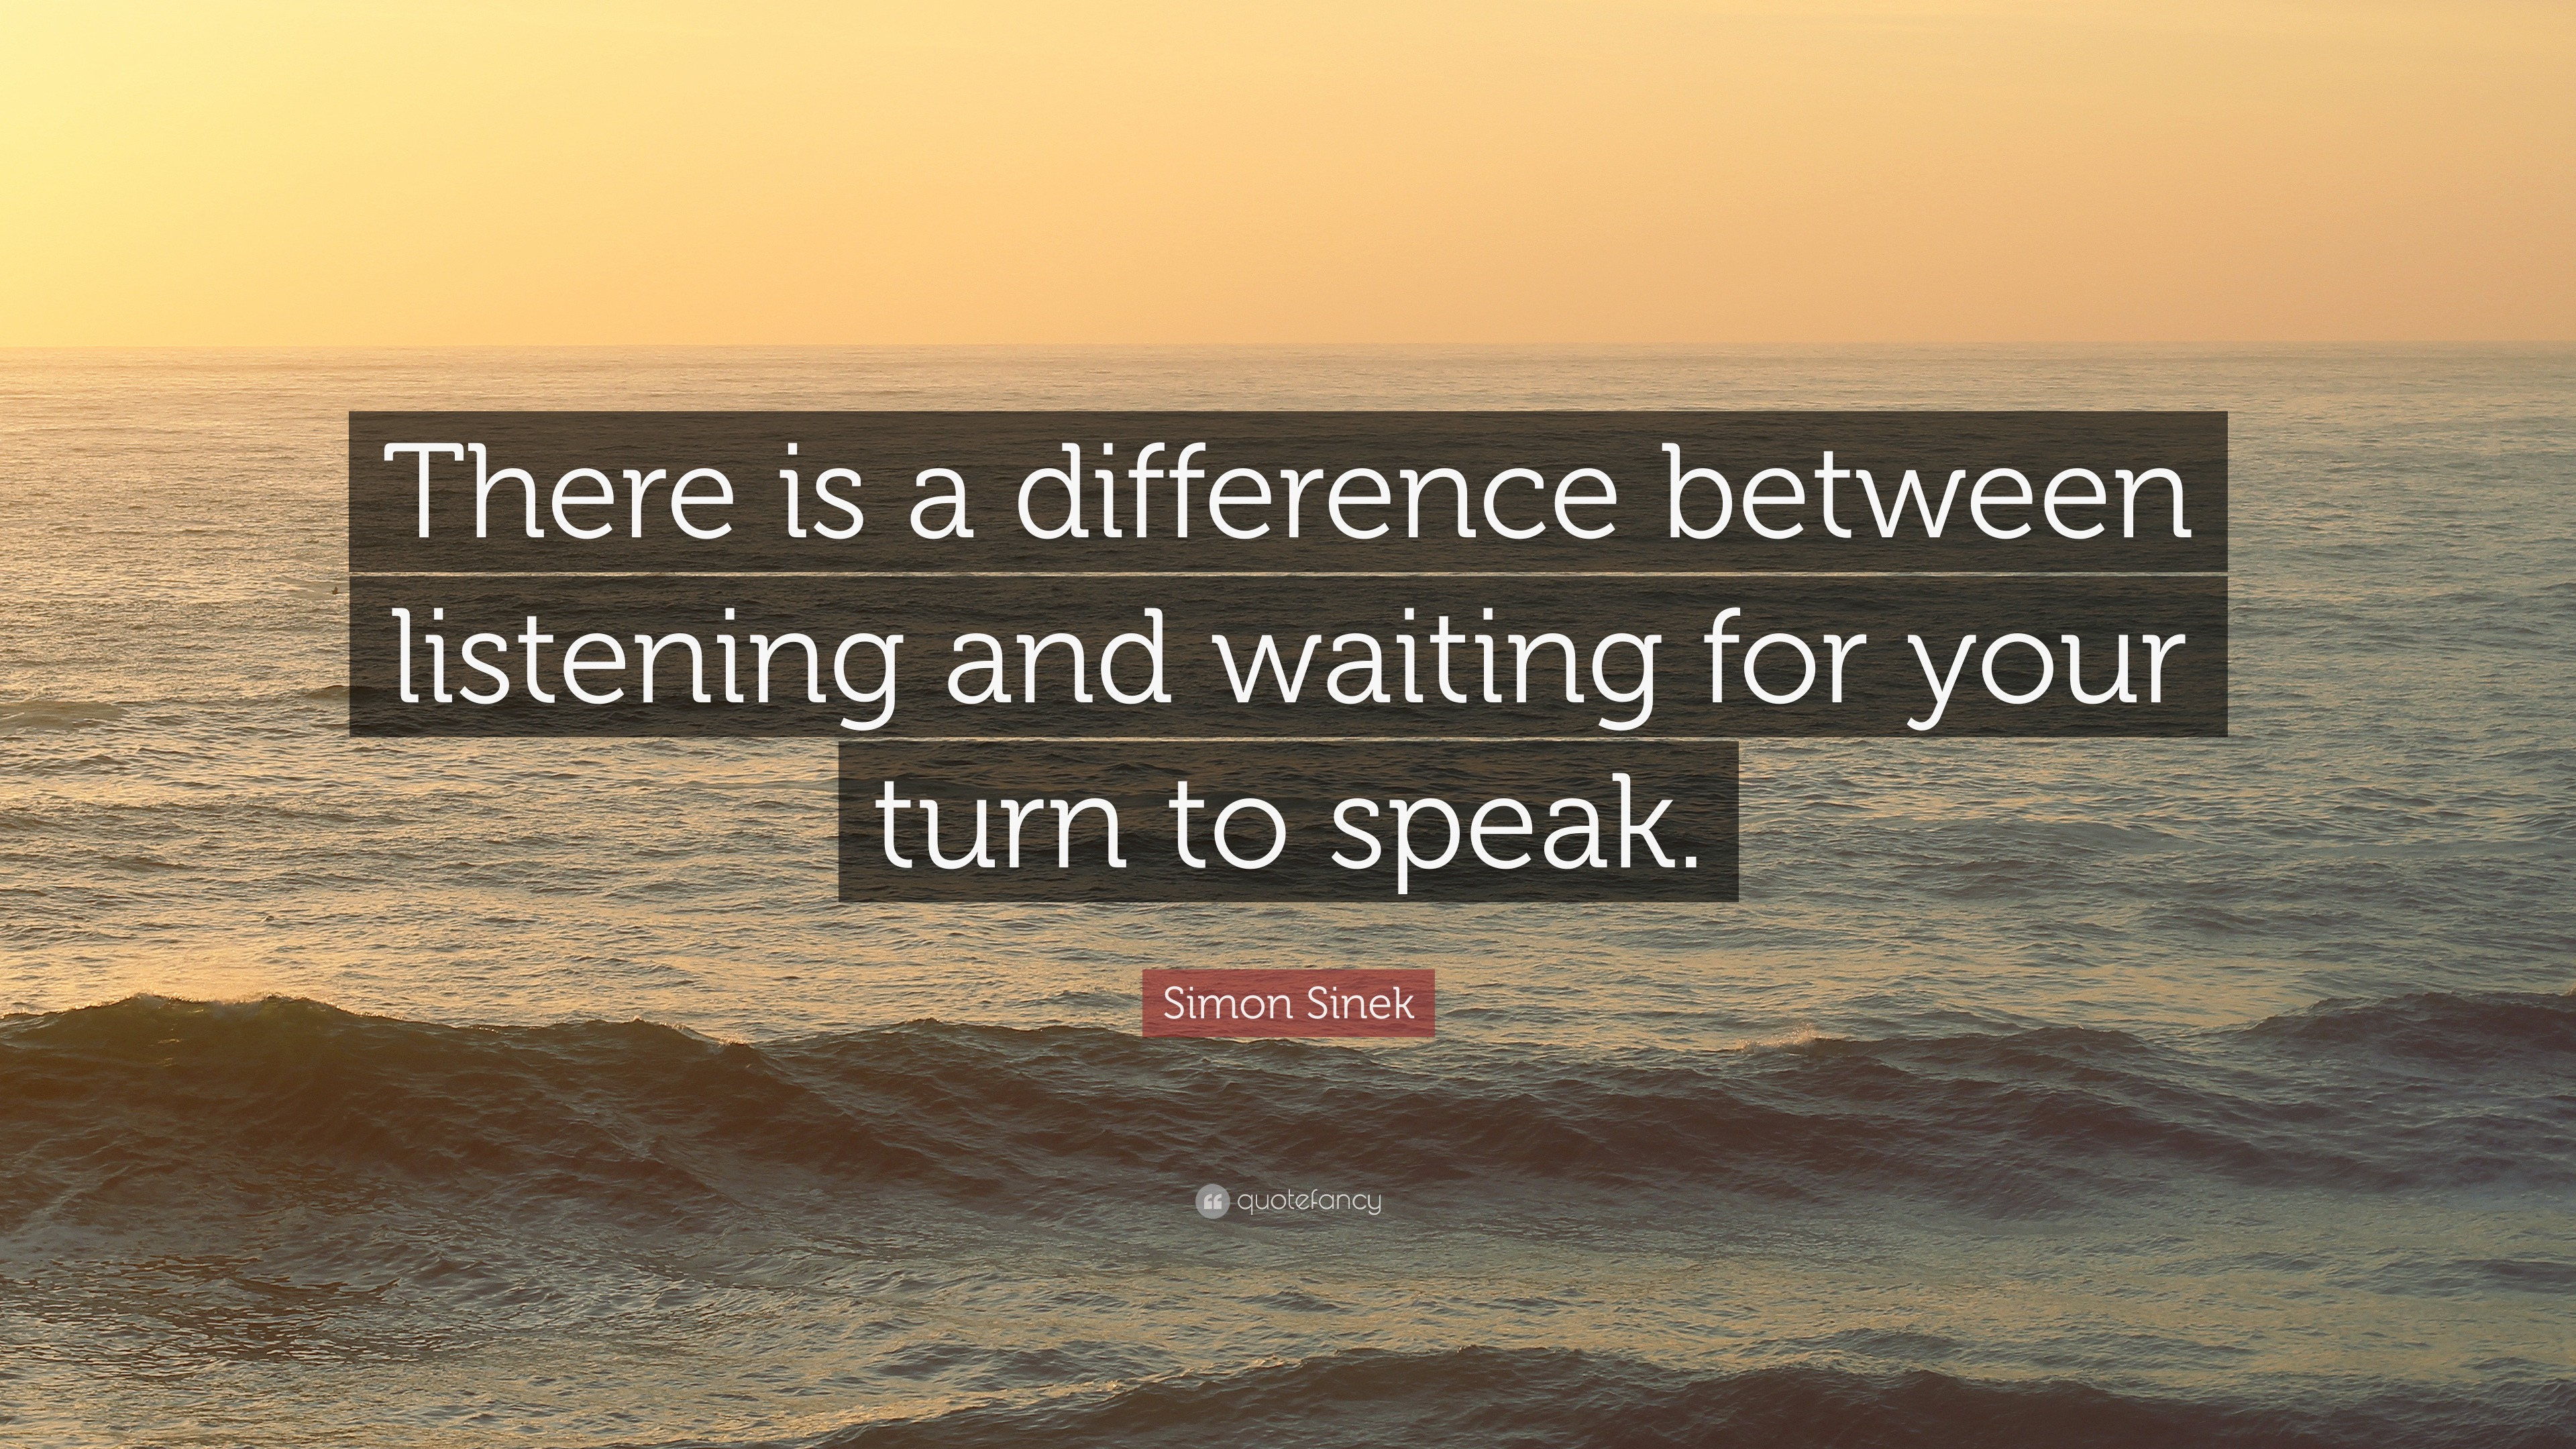 Simon Sinek Quote: “There is a difference between listening and waiting ...